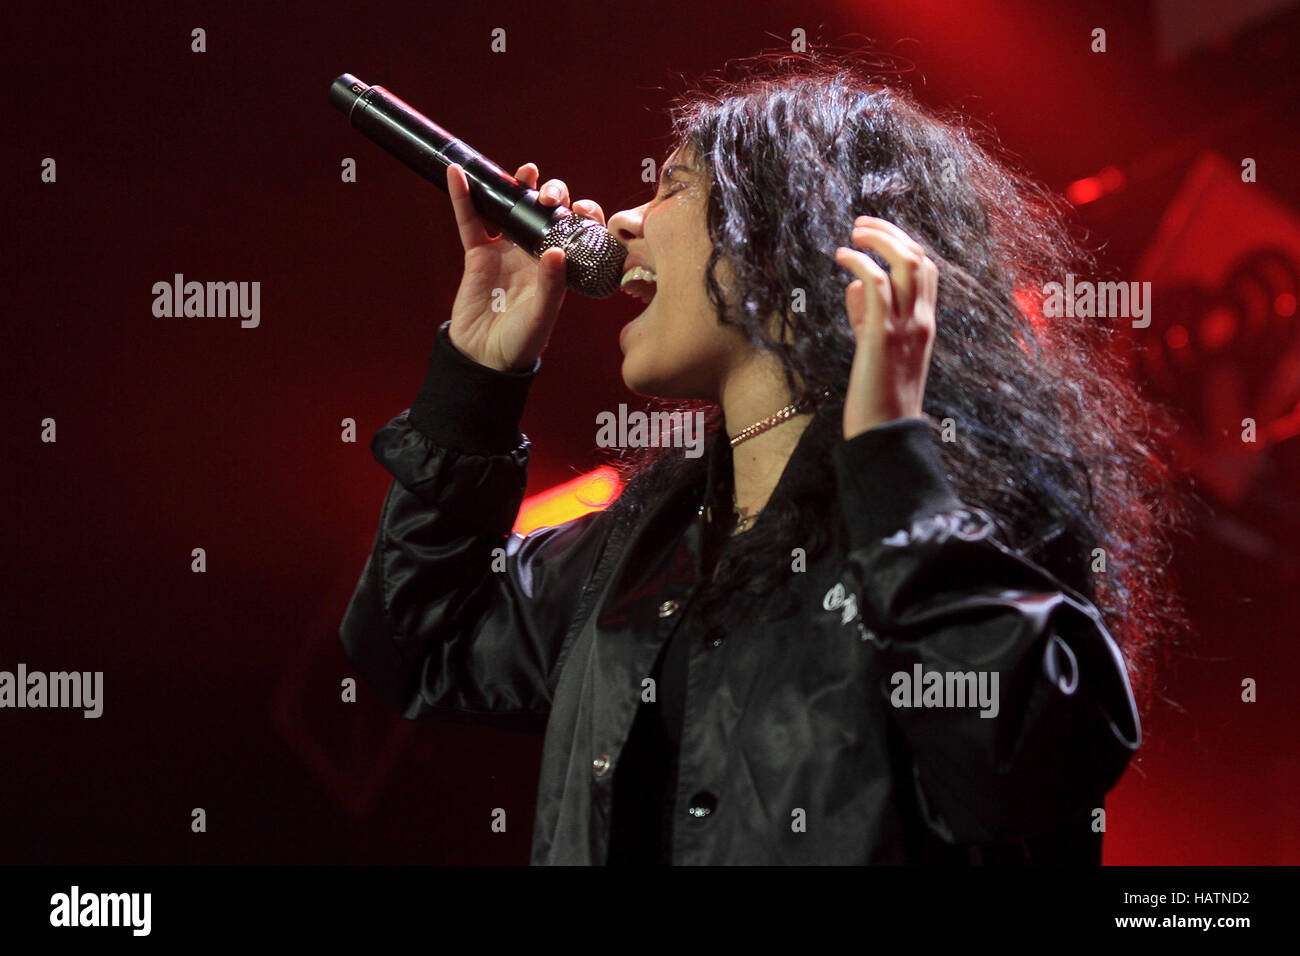 Alessia Cara performs live in concert during the 106.1 KISS FM's Jingle Ball 2016 Presented by Capital One at American Airlines Center on November 29, 2016 in Dallas, Texas. (Photo by Dan Elam/The Photo Access) Stock Photo